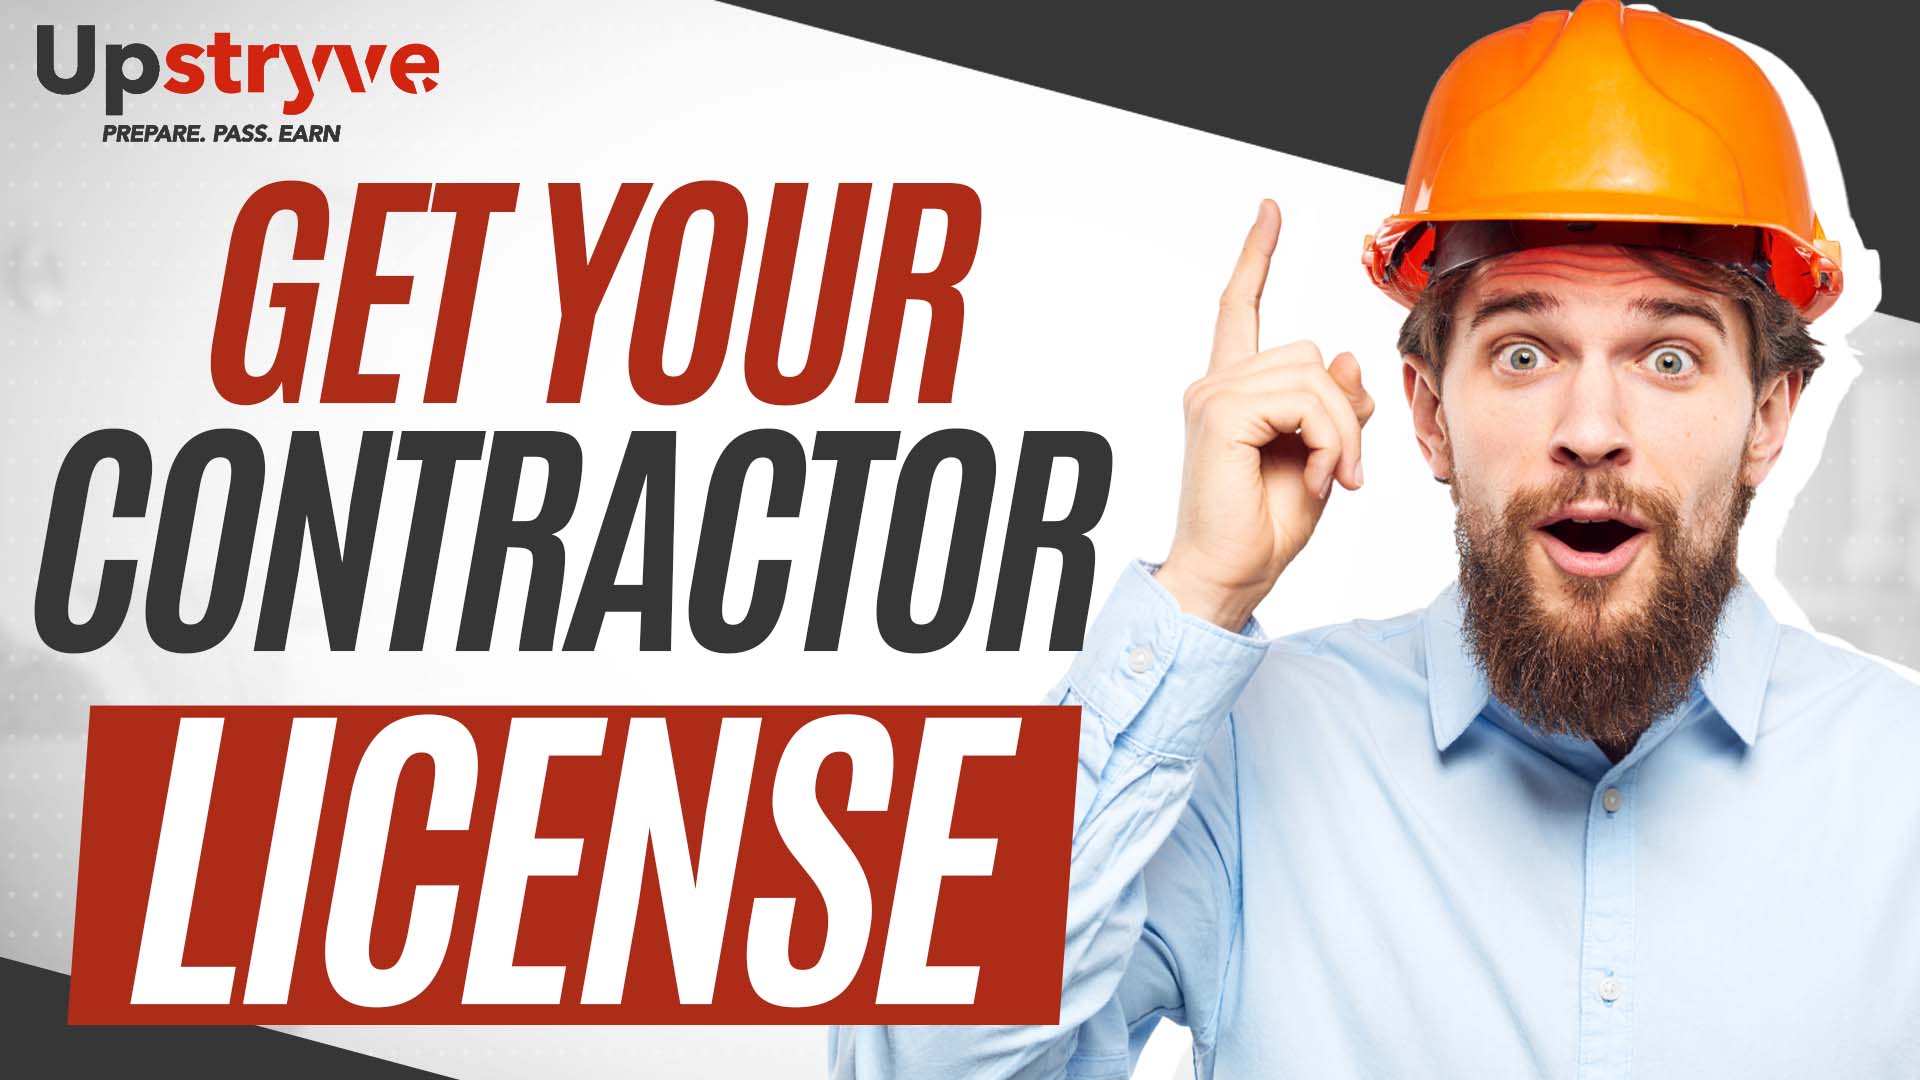 Get Your Contractor License And Build Your Business